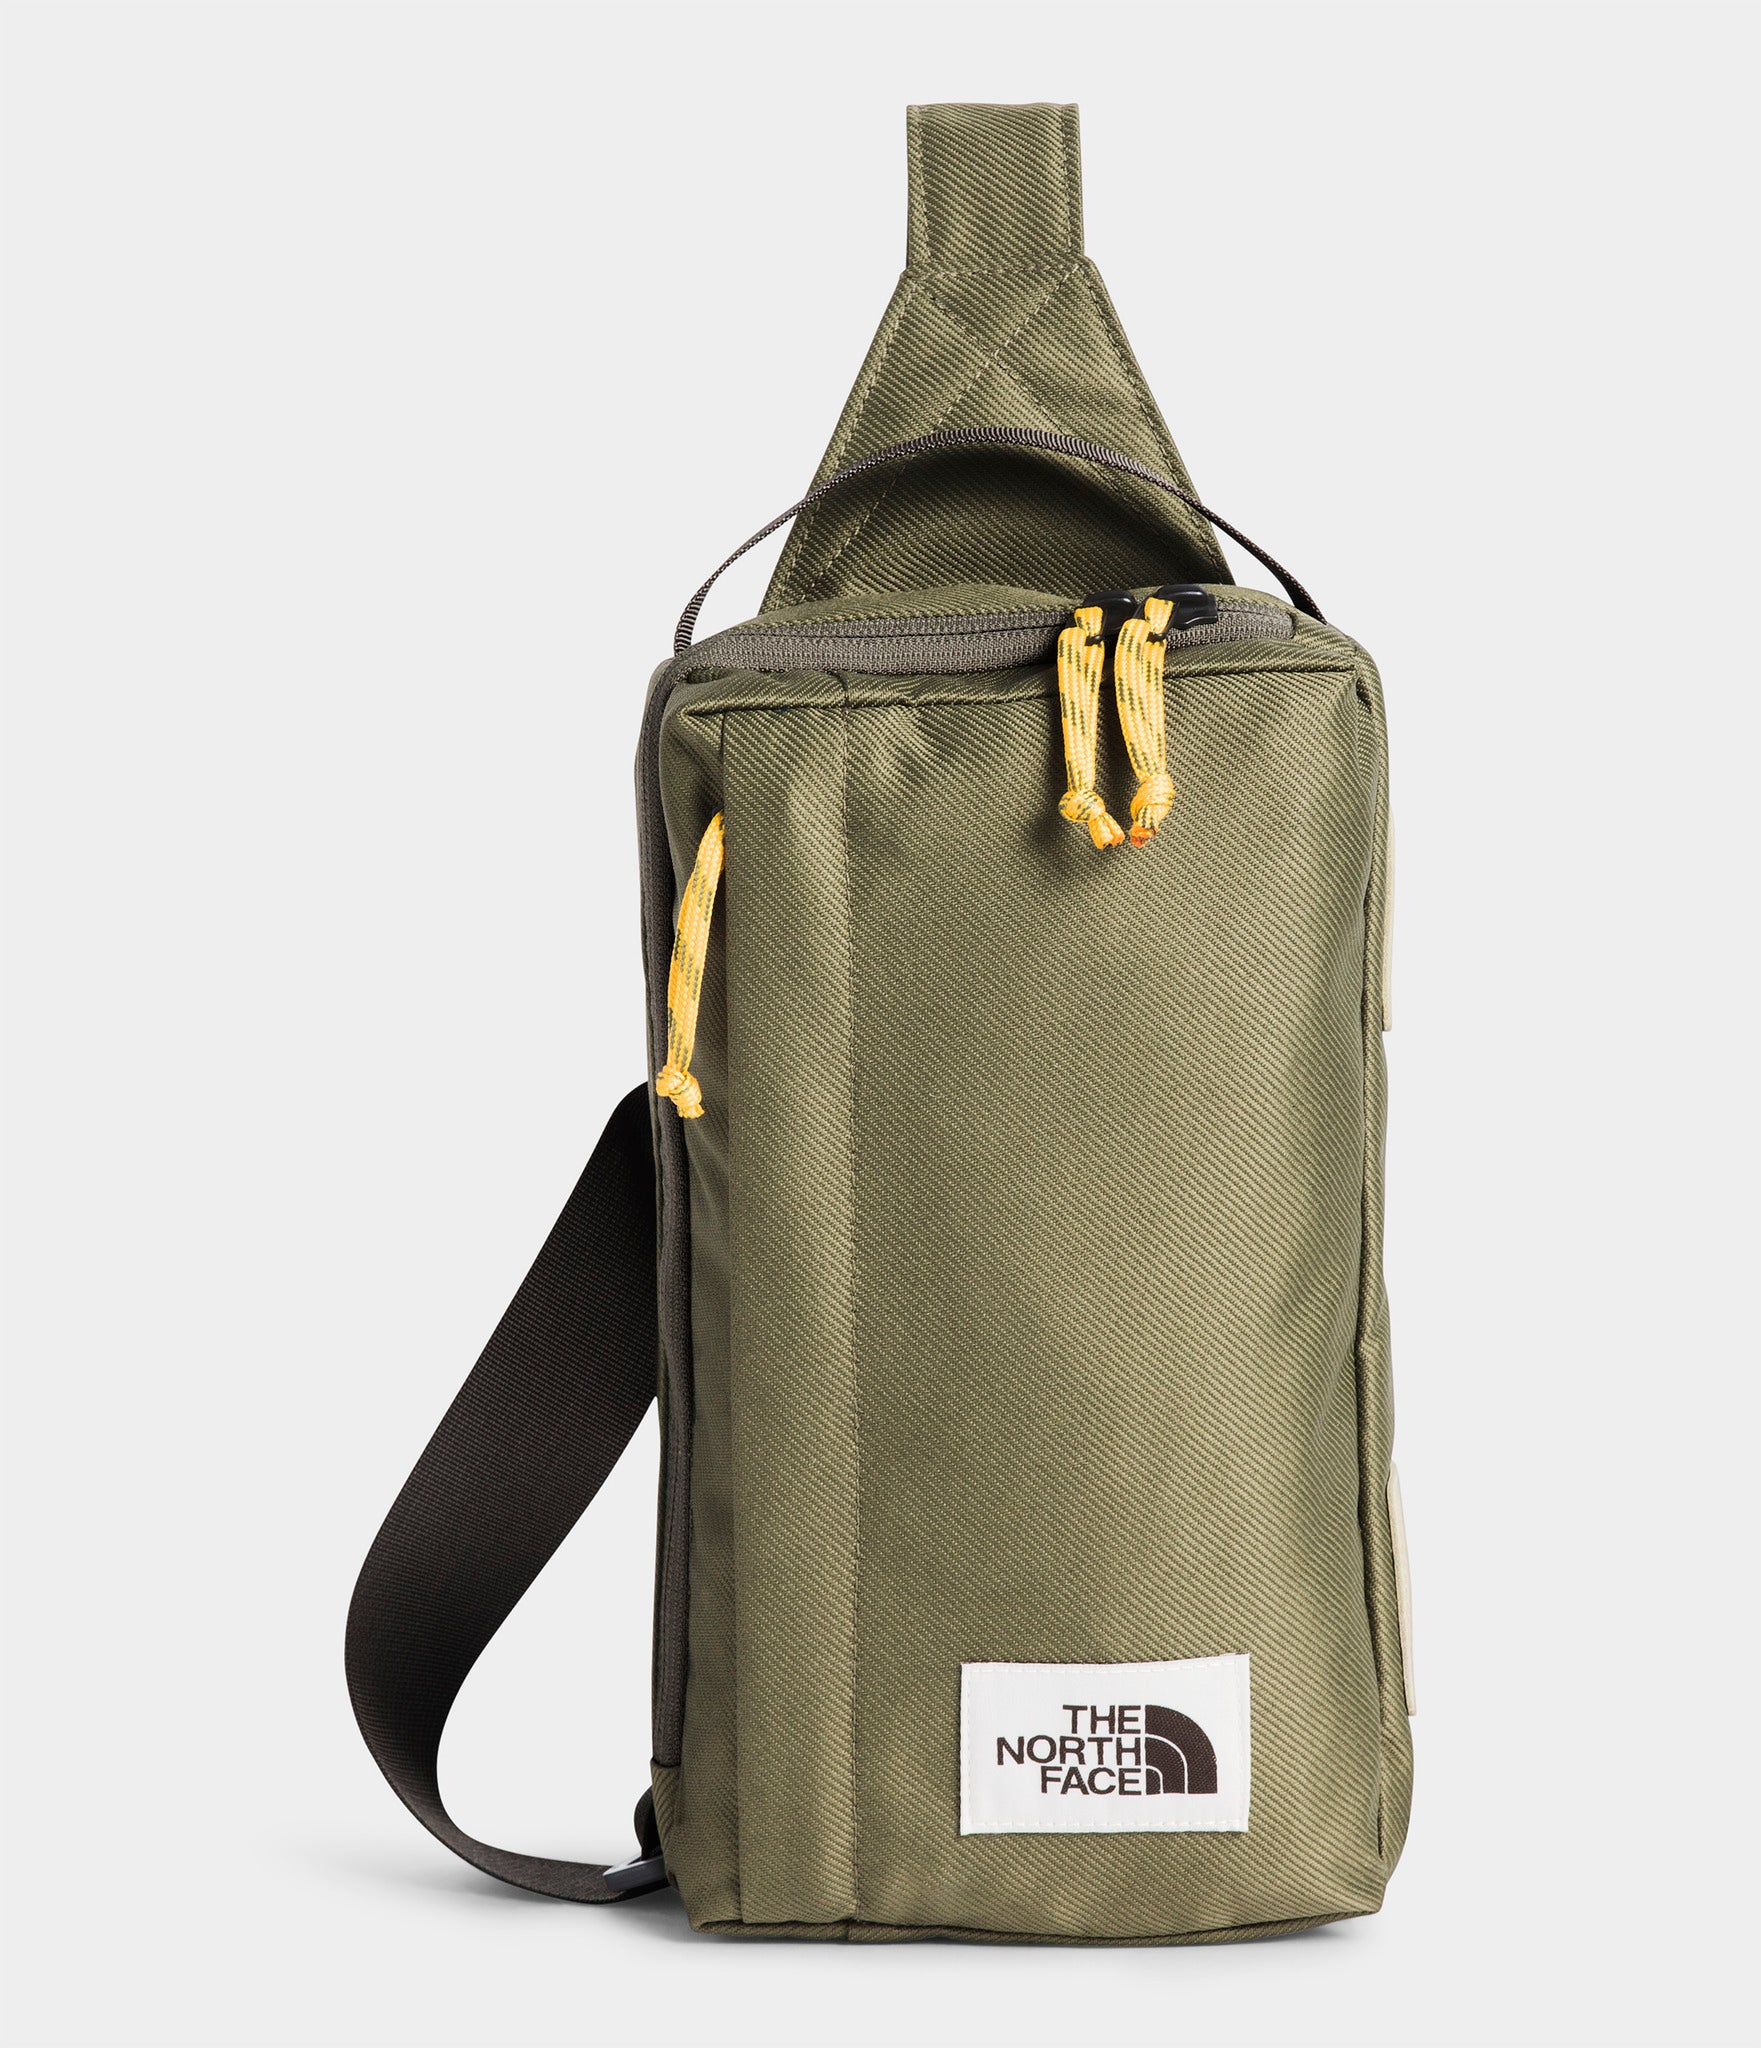 The North Face Field Bag | The Last Hunt